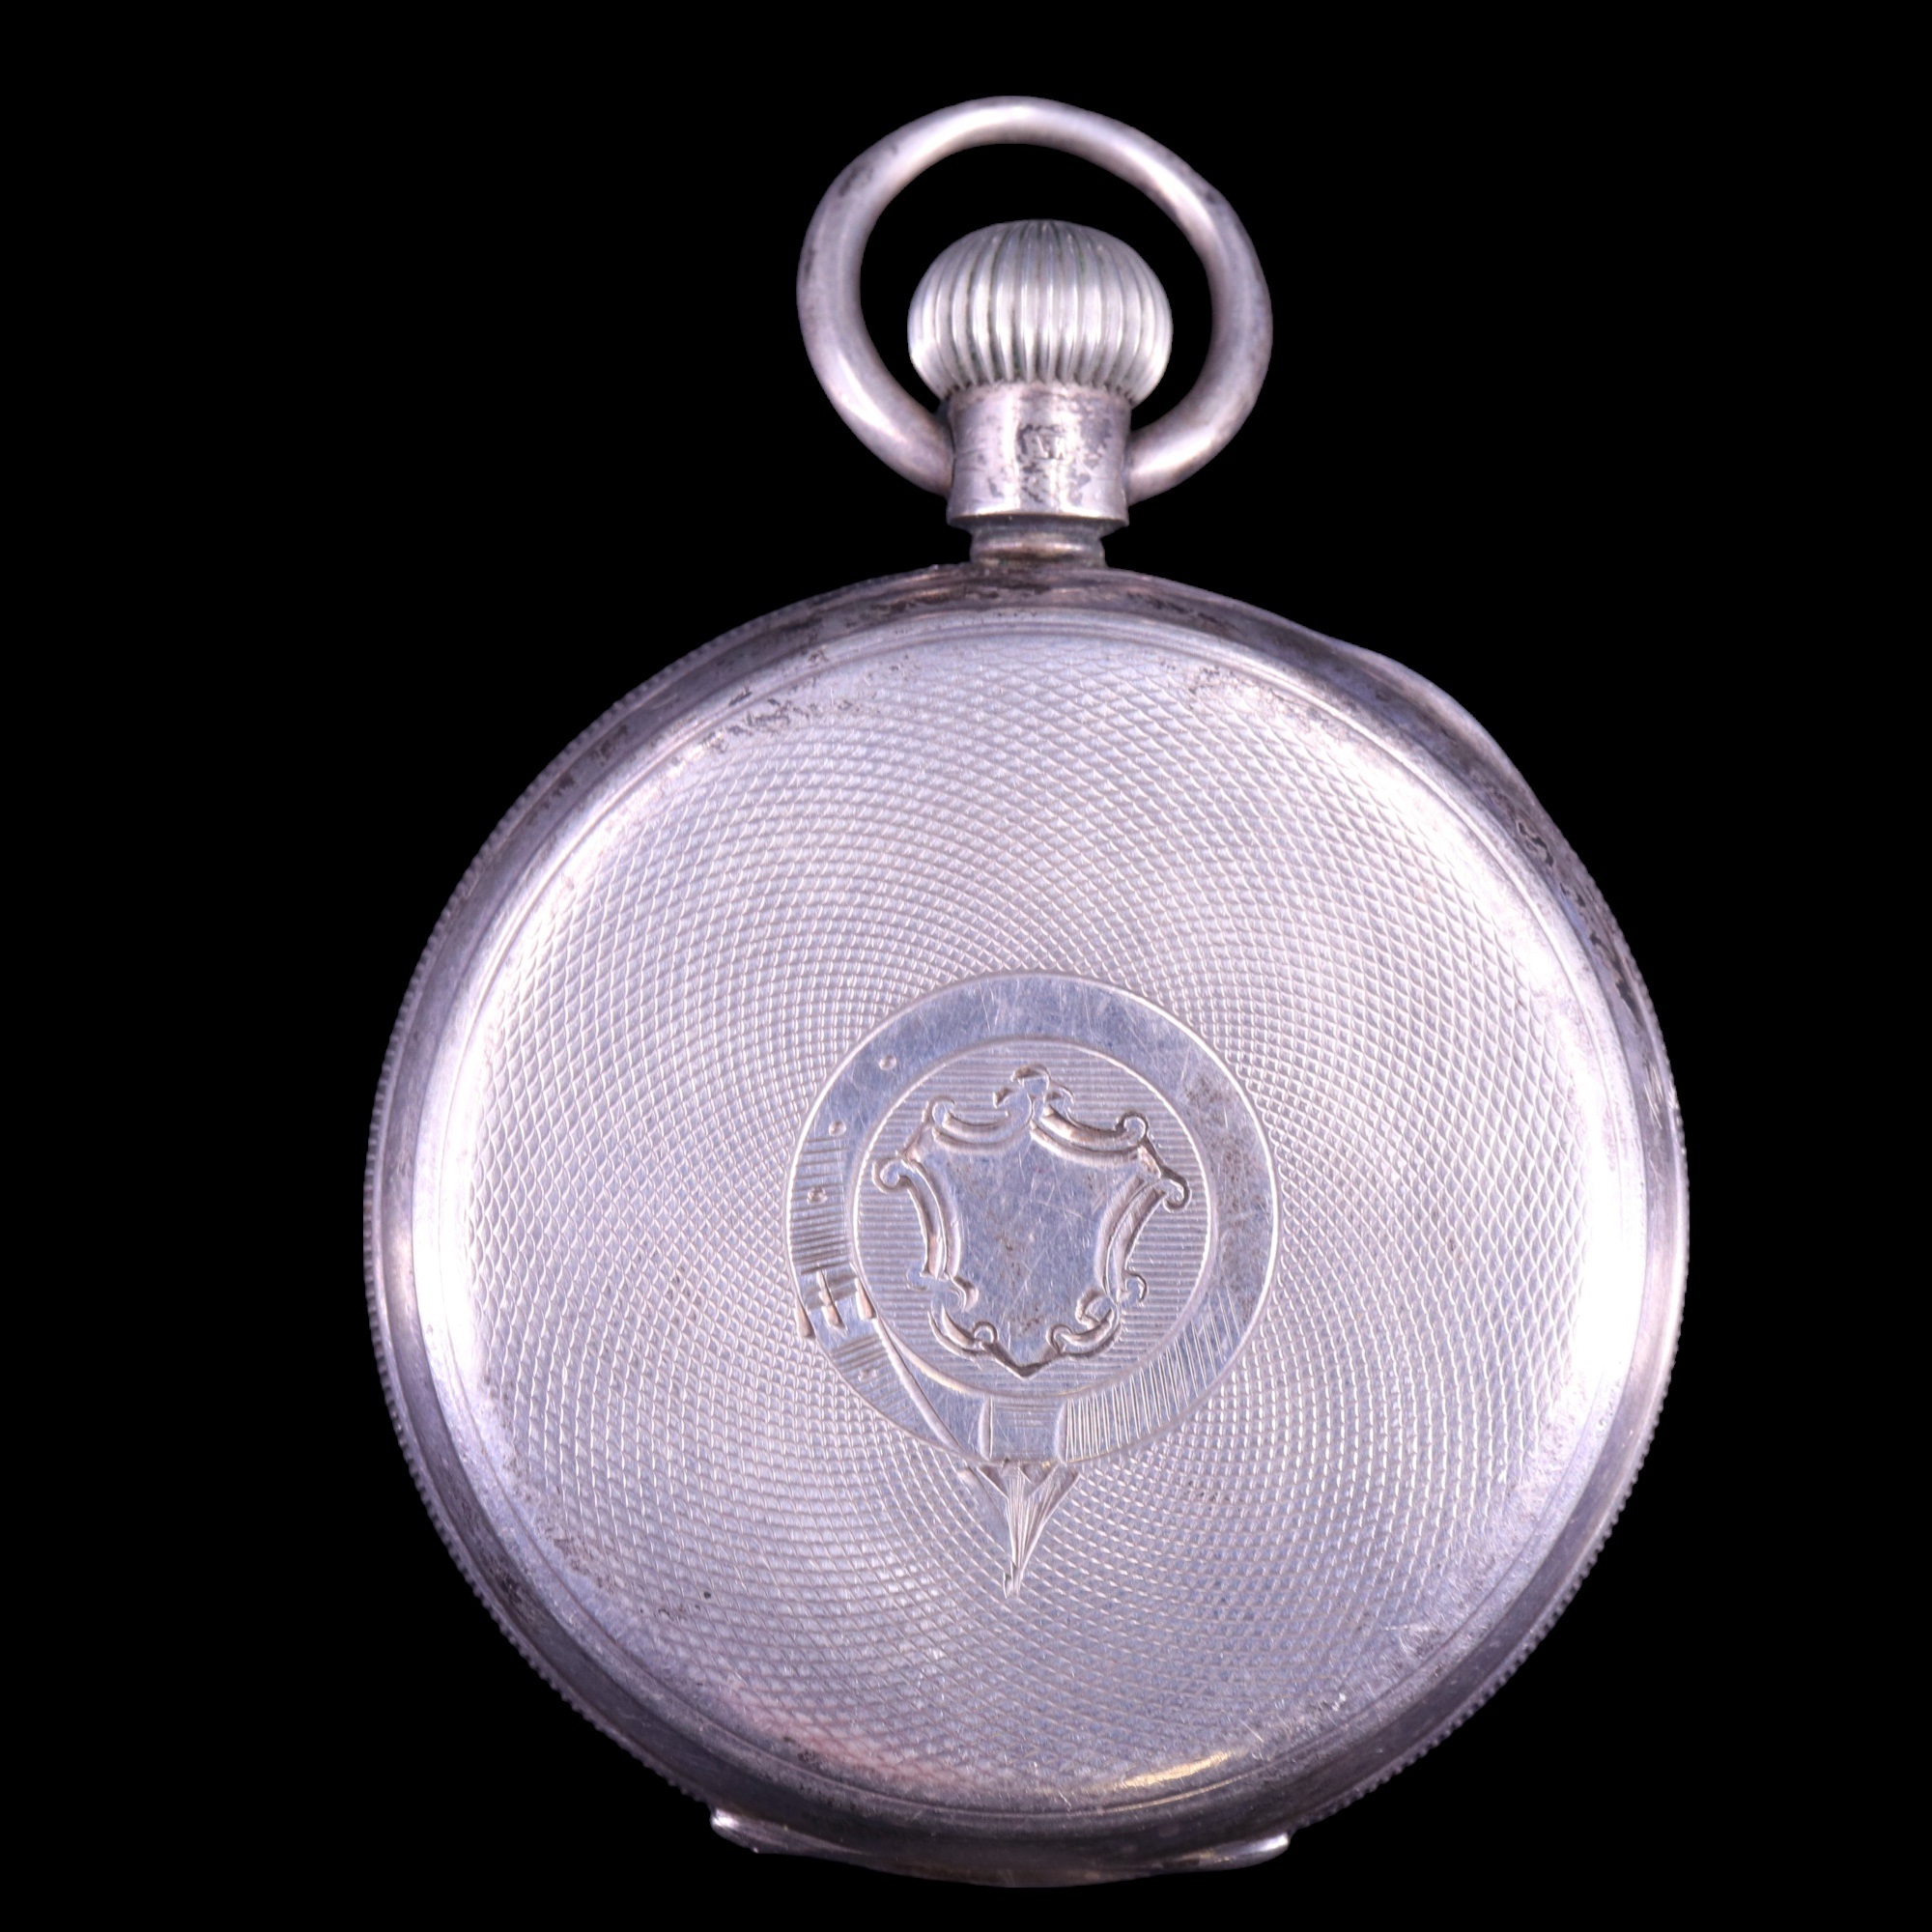 An Edwardian silver pocket watch by Waltham, having a crown-wound movement and white enamel face - Image 2 of 5